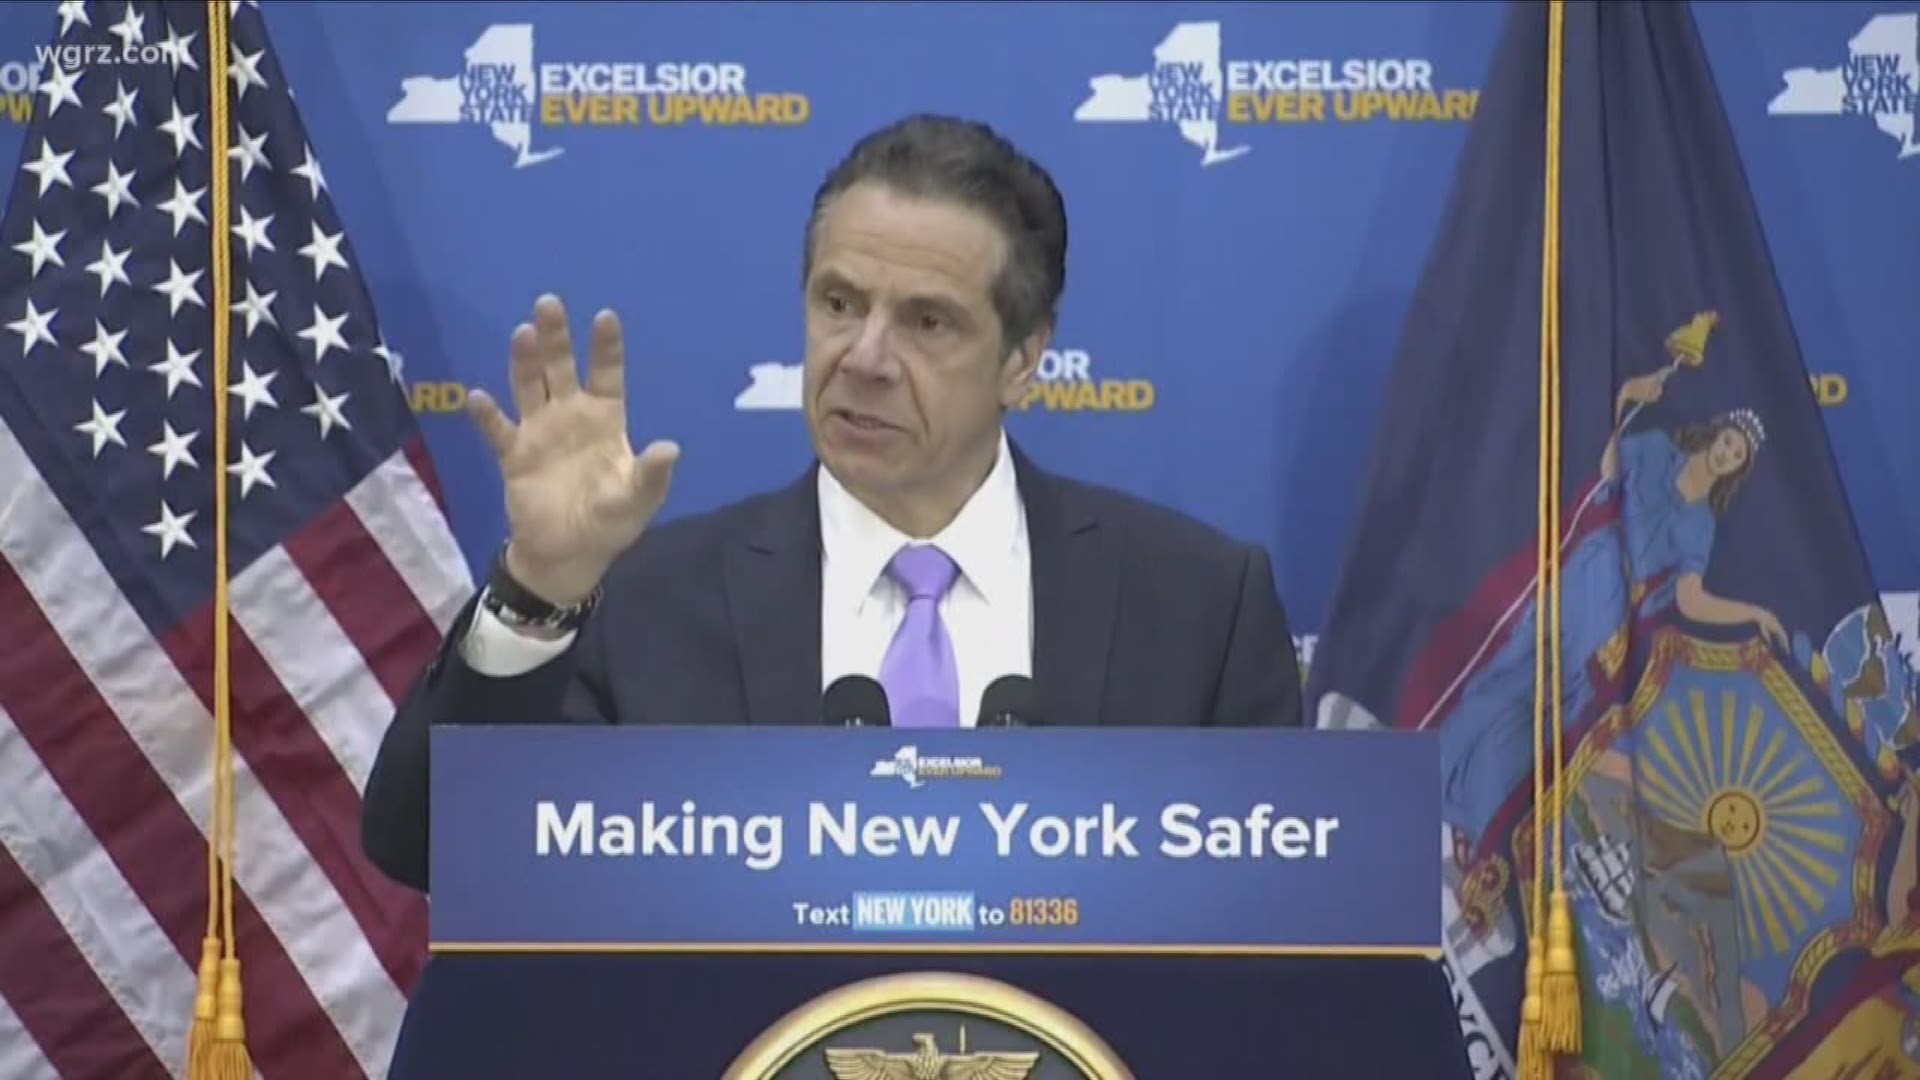 Cuomo proposed a "red flag bill" that would allow teachers and administrators the ability to file a petition with a judge... to keep guns away from students who may pose a risk.